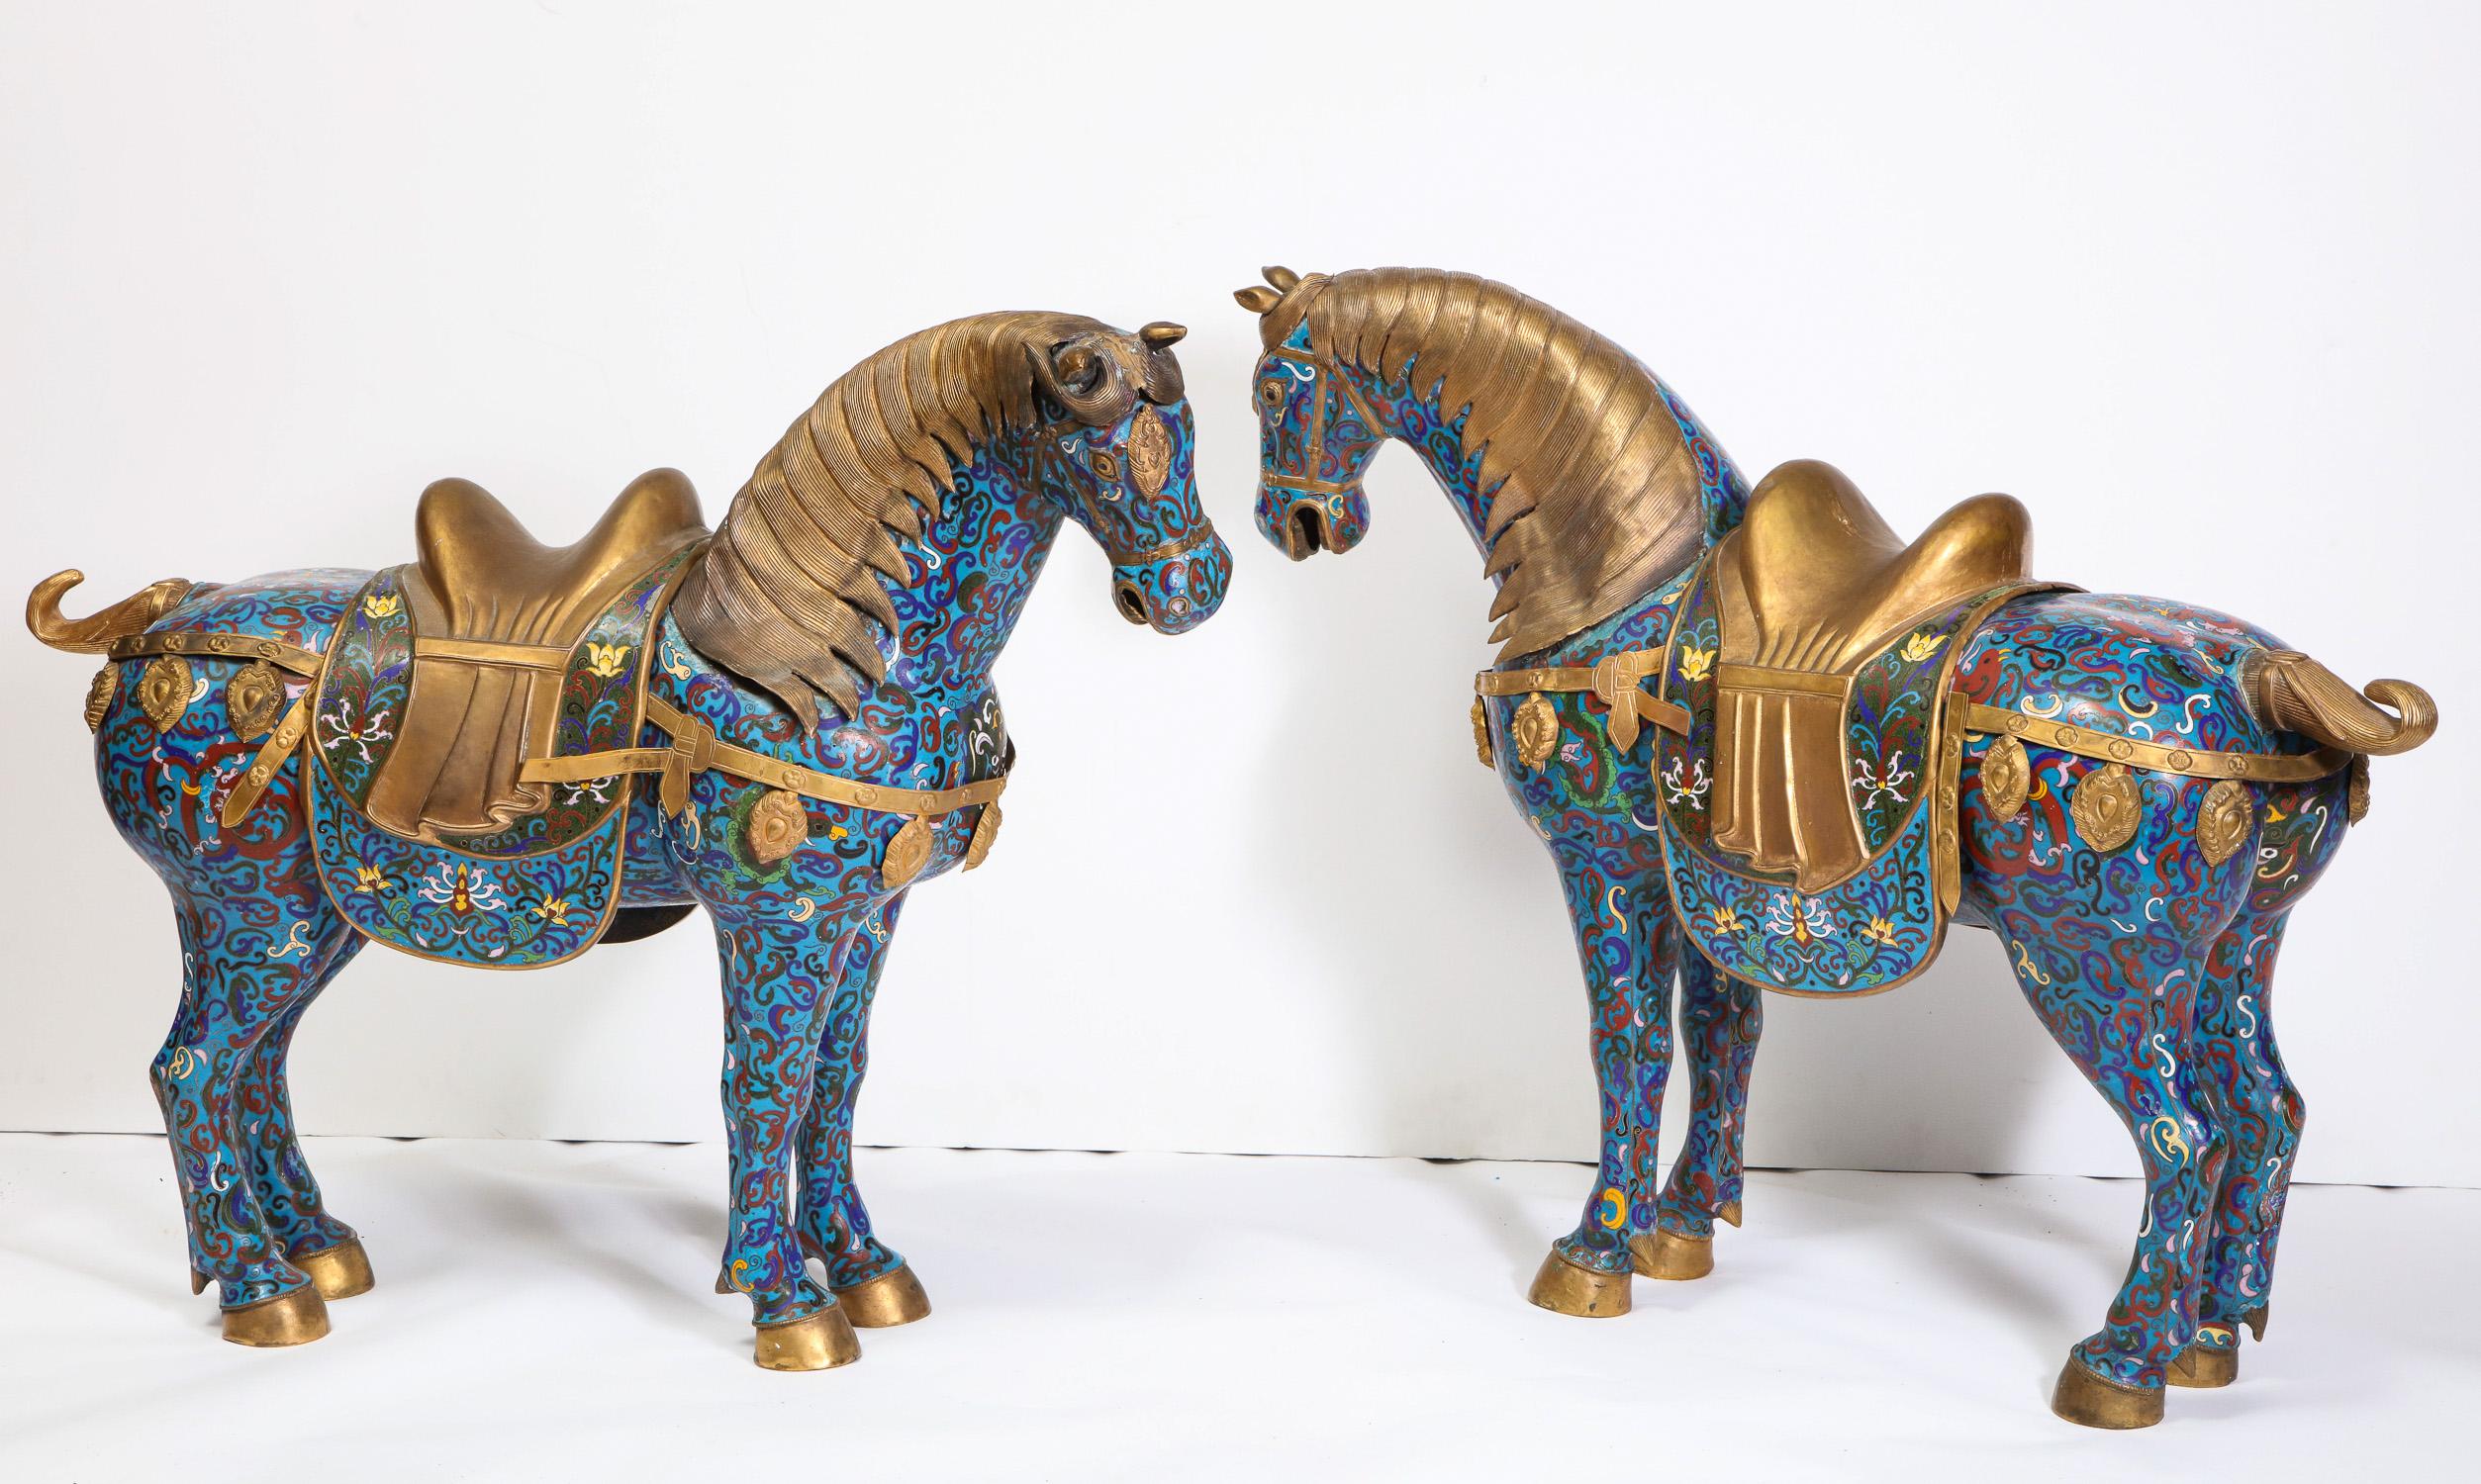 20th Century Large Pair of Chinese Cloisonné Enamel Horses